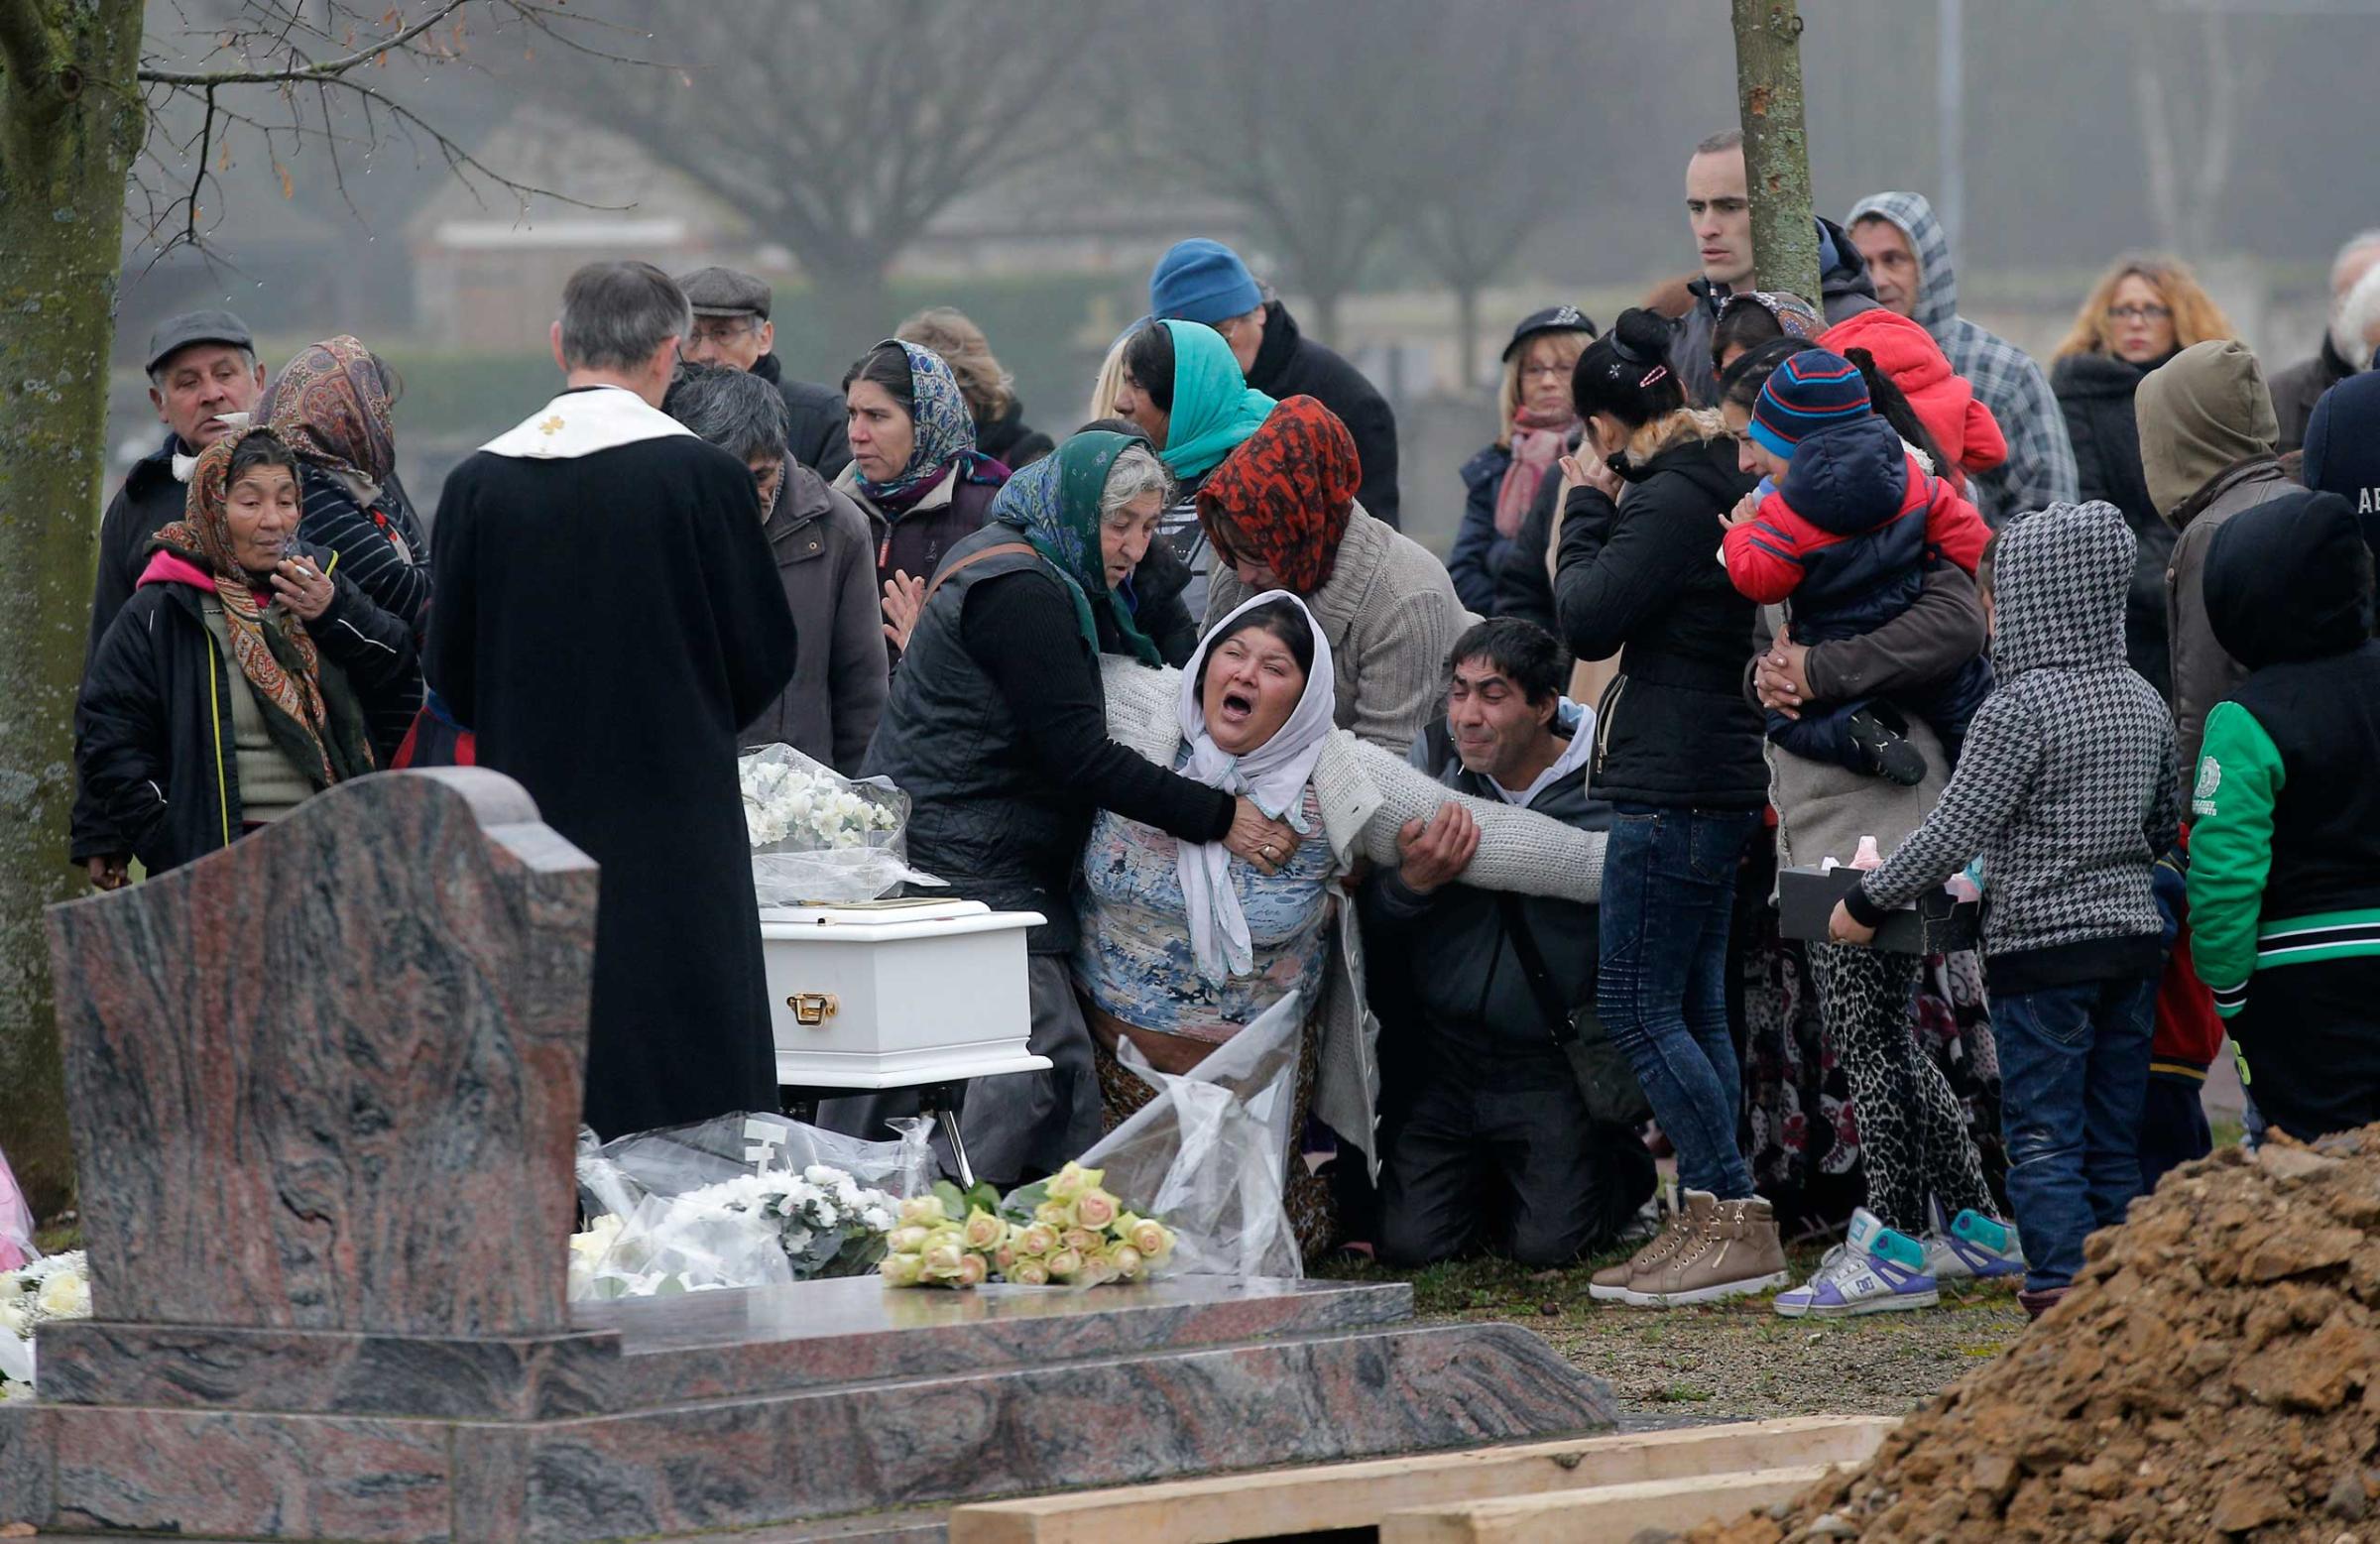 Jan. 5, 2015. The mother of Maria Francesca, who died of sudden infant death syndrome, cries in front of the coffin of her baby during the funeral in Wissous, outside Paris.